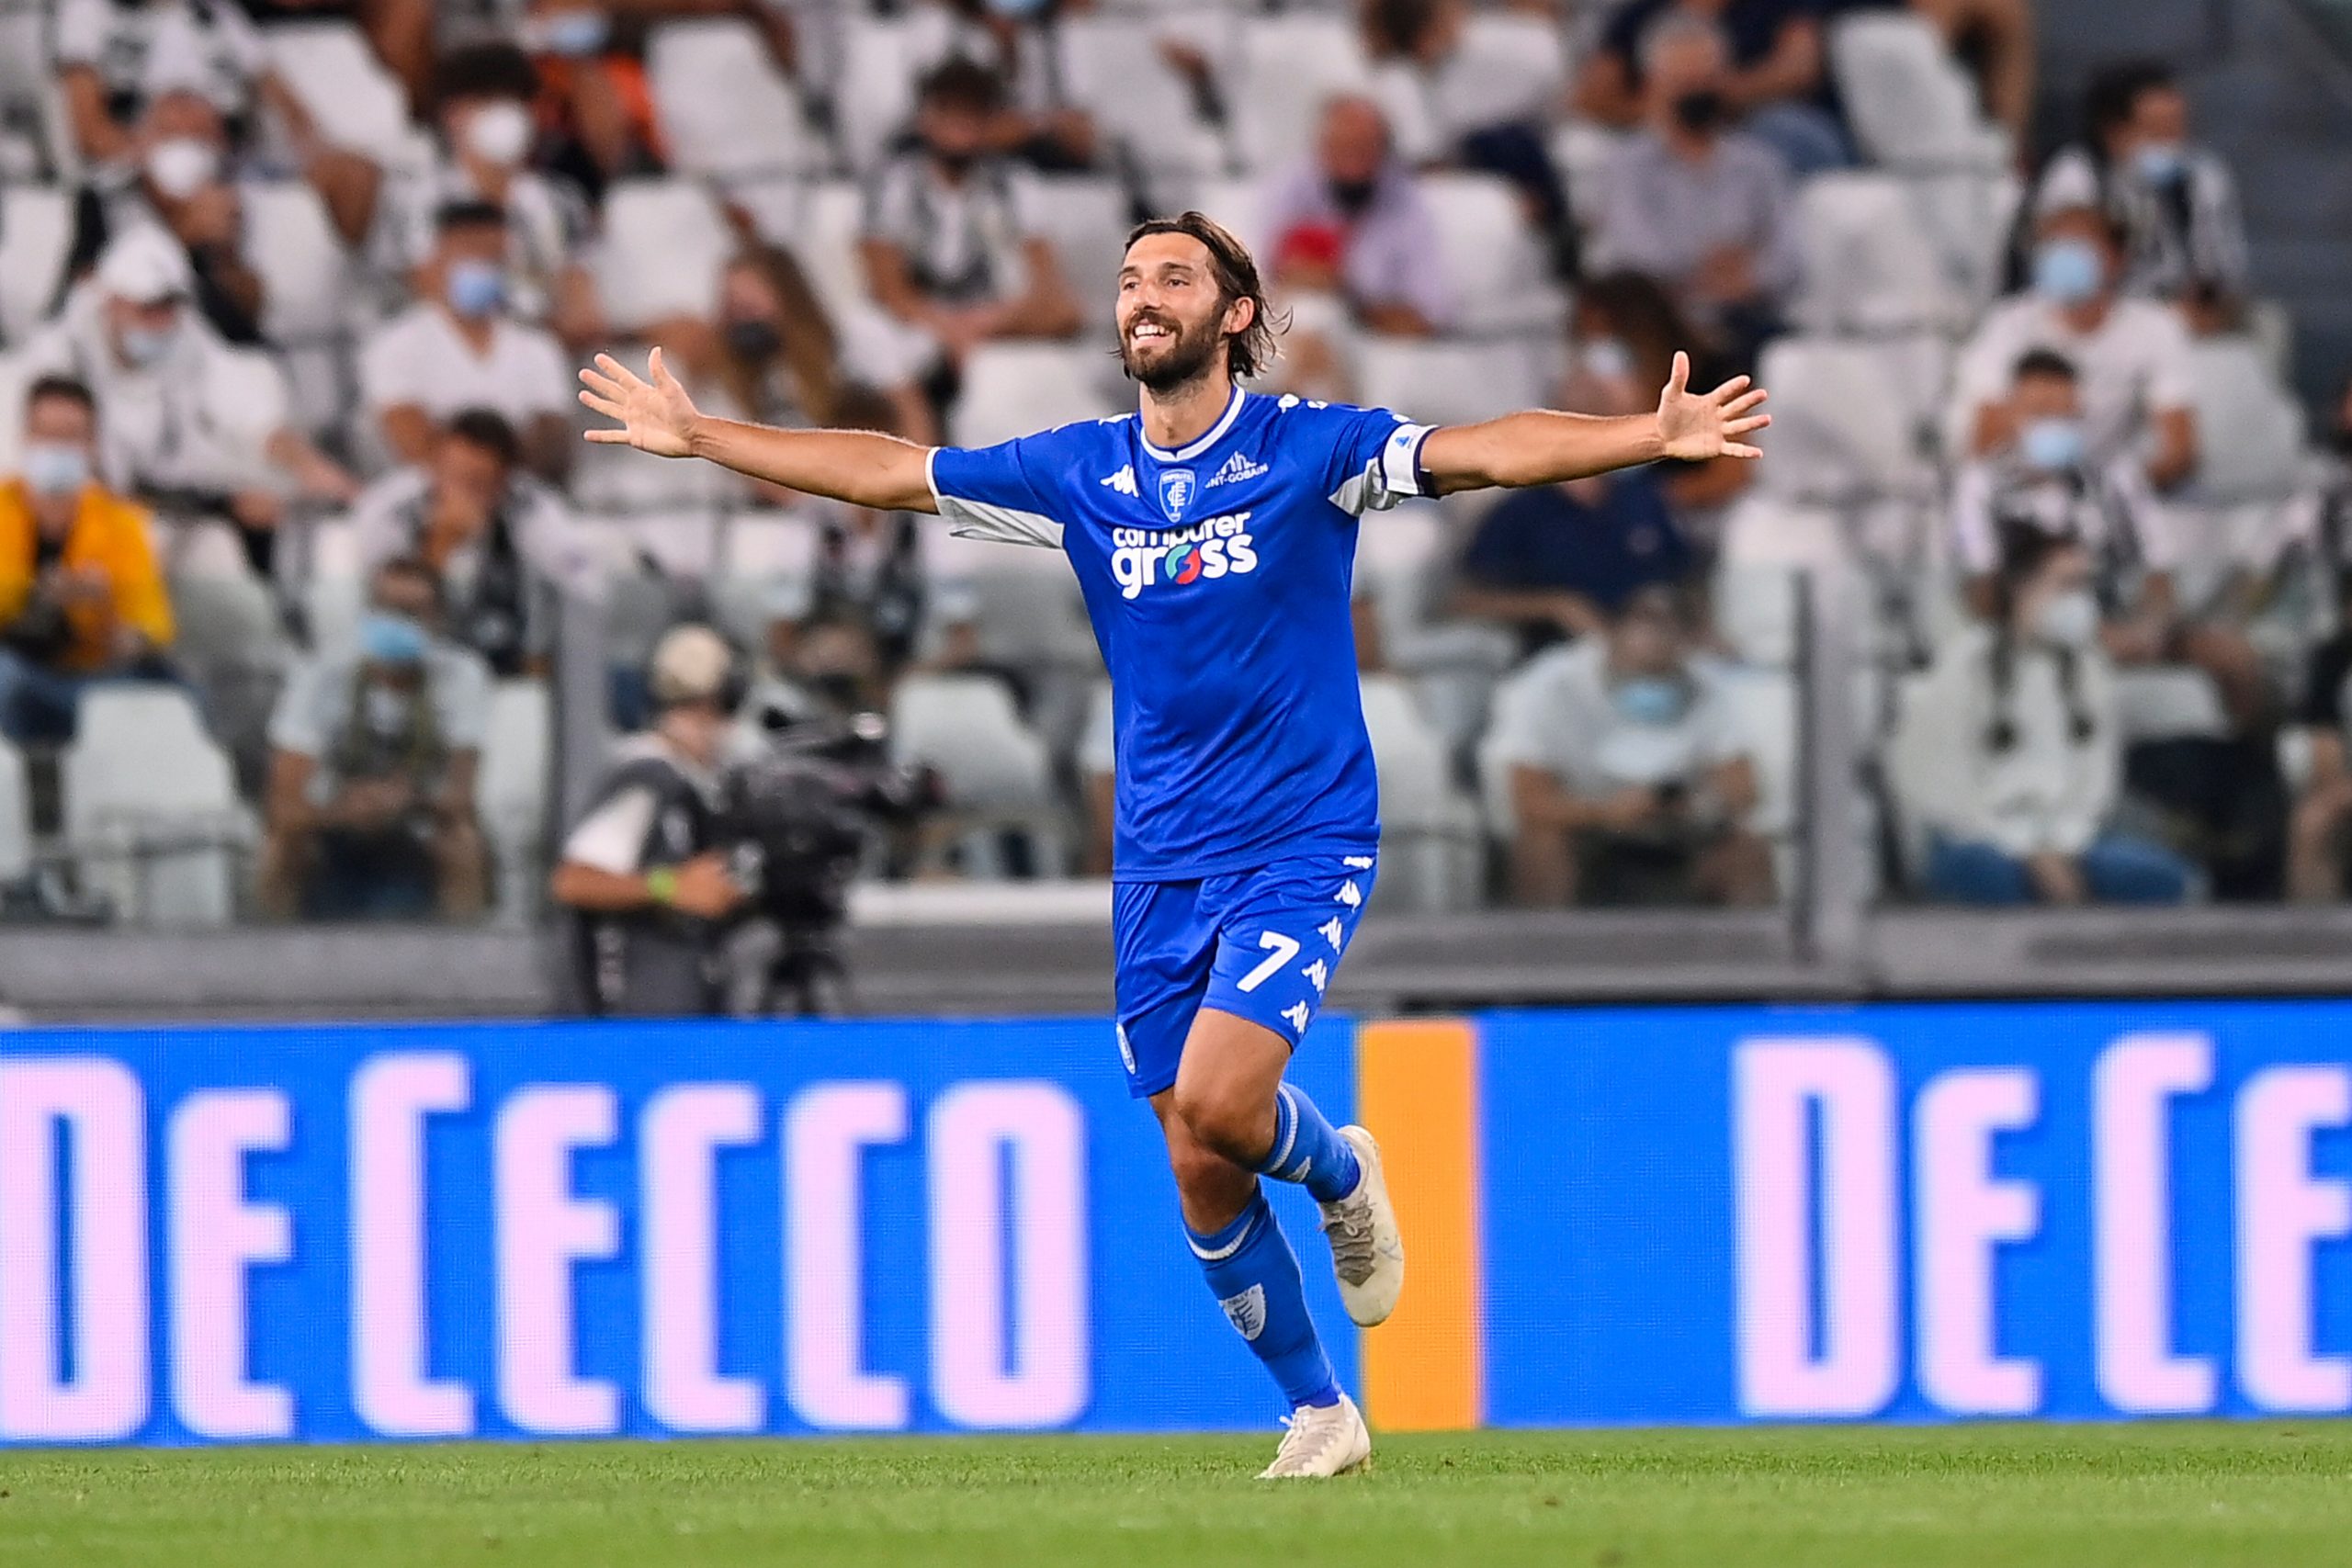 Serie A: Juventus fall to Empoli in first game without Cristiano Ronaldo